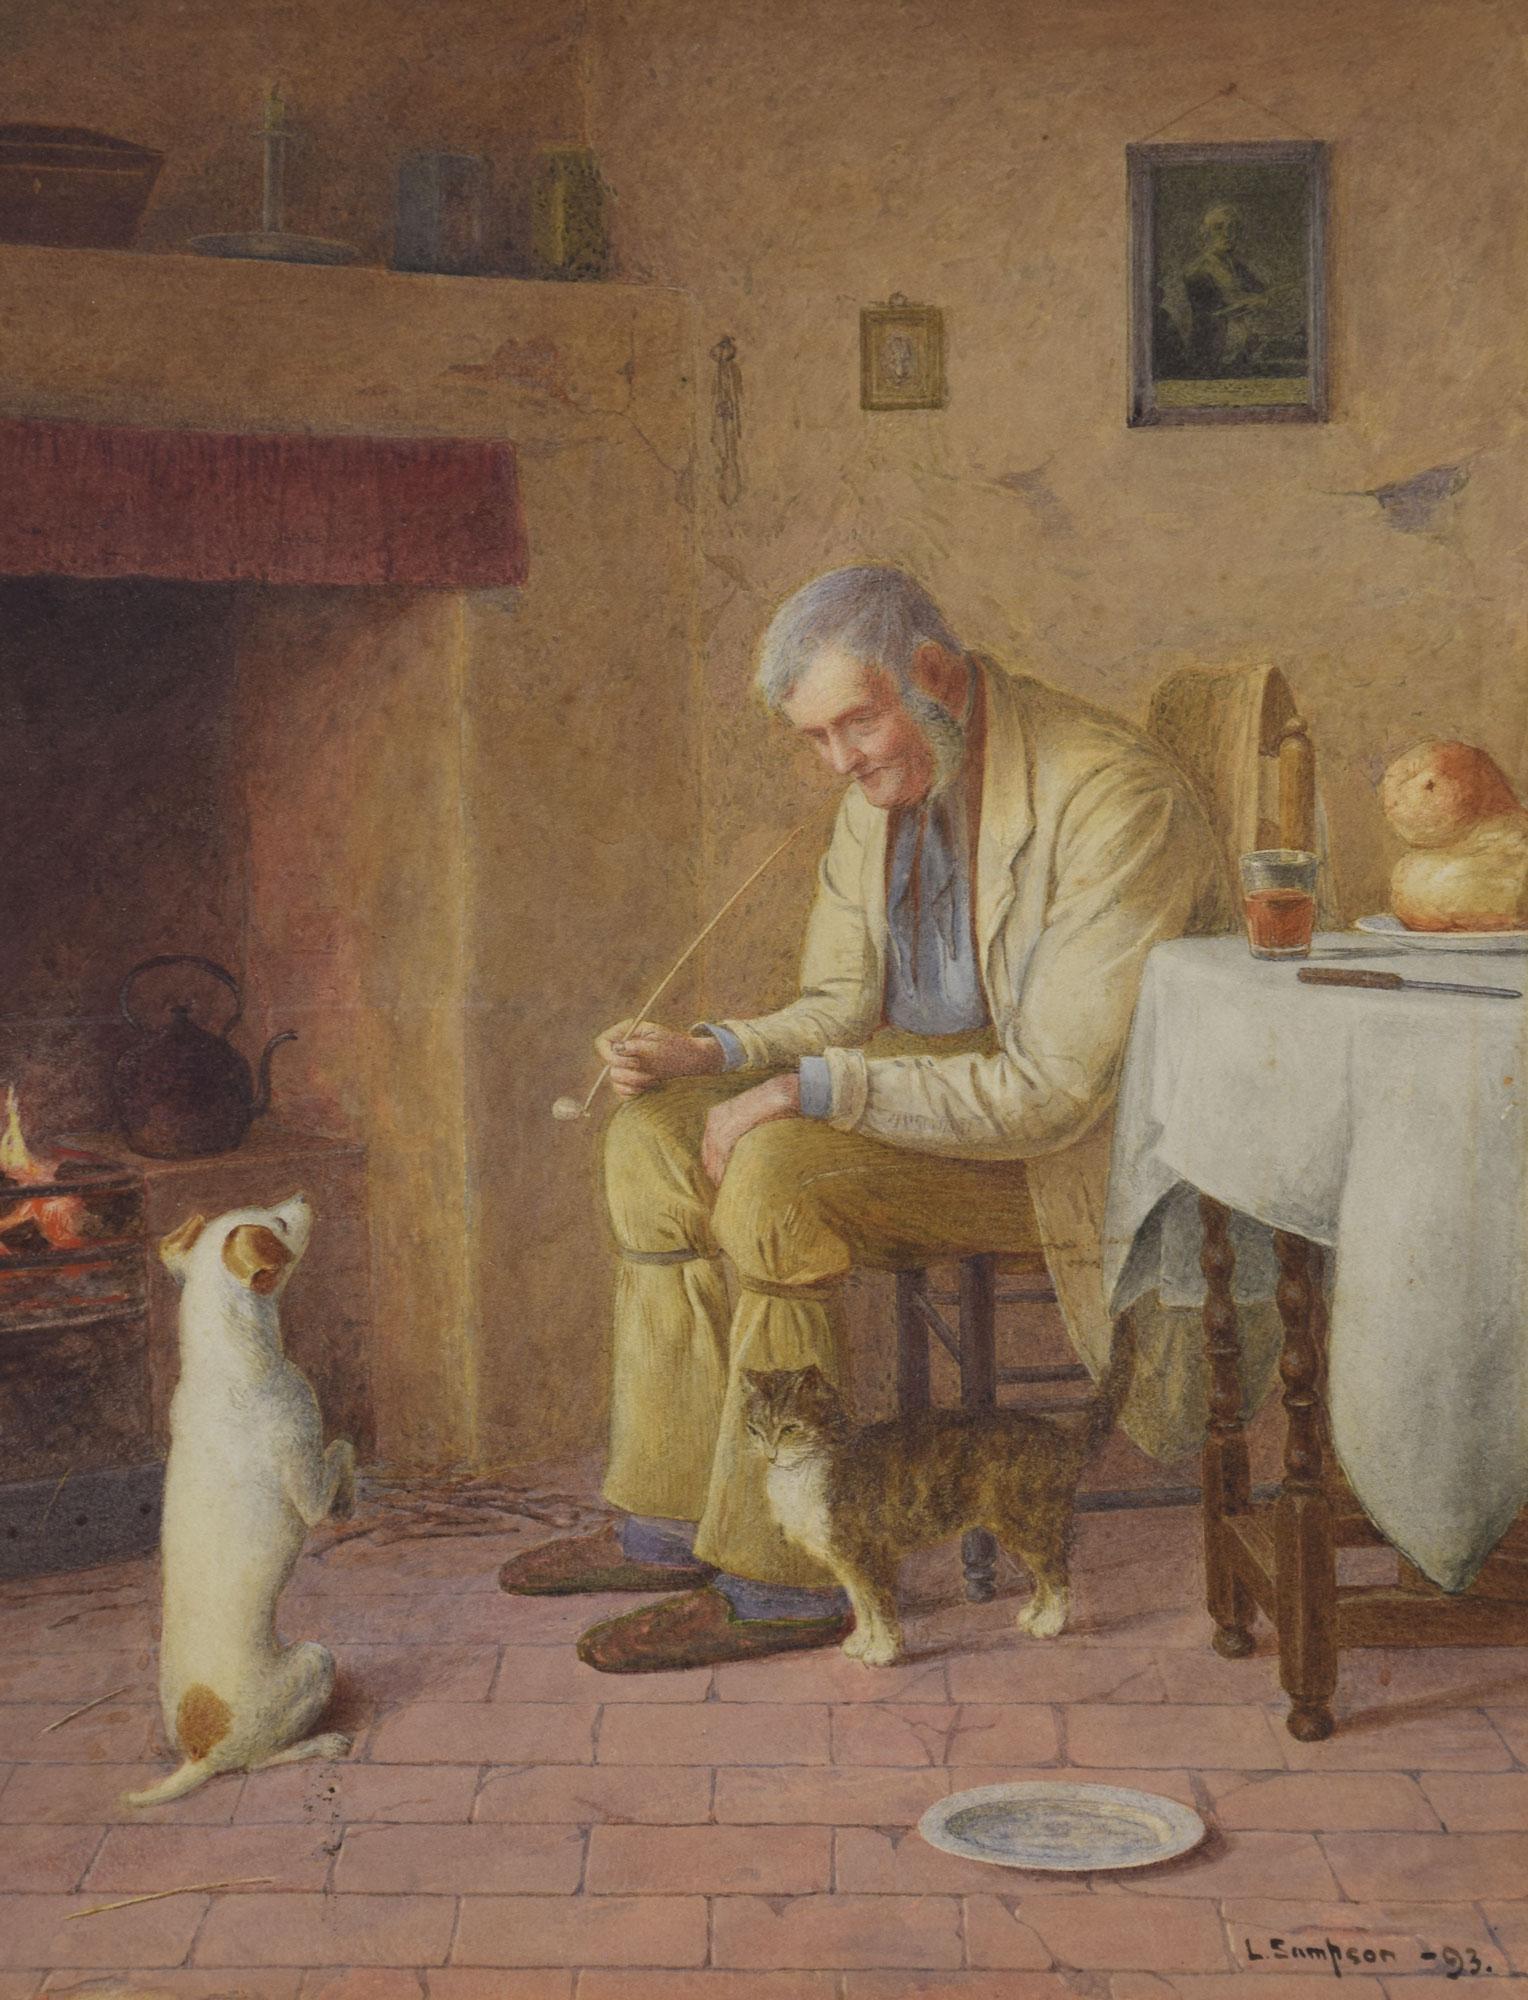 L Sampson signed watercolor, depicting a charming old man and his dog and cat around the open fire.
Dimensions:
Height 23 inches
Width 20 inches
Depth 1 inches.